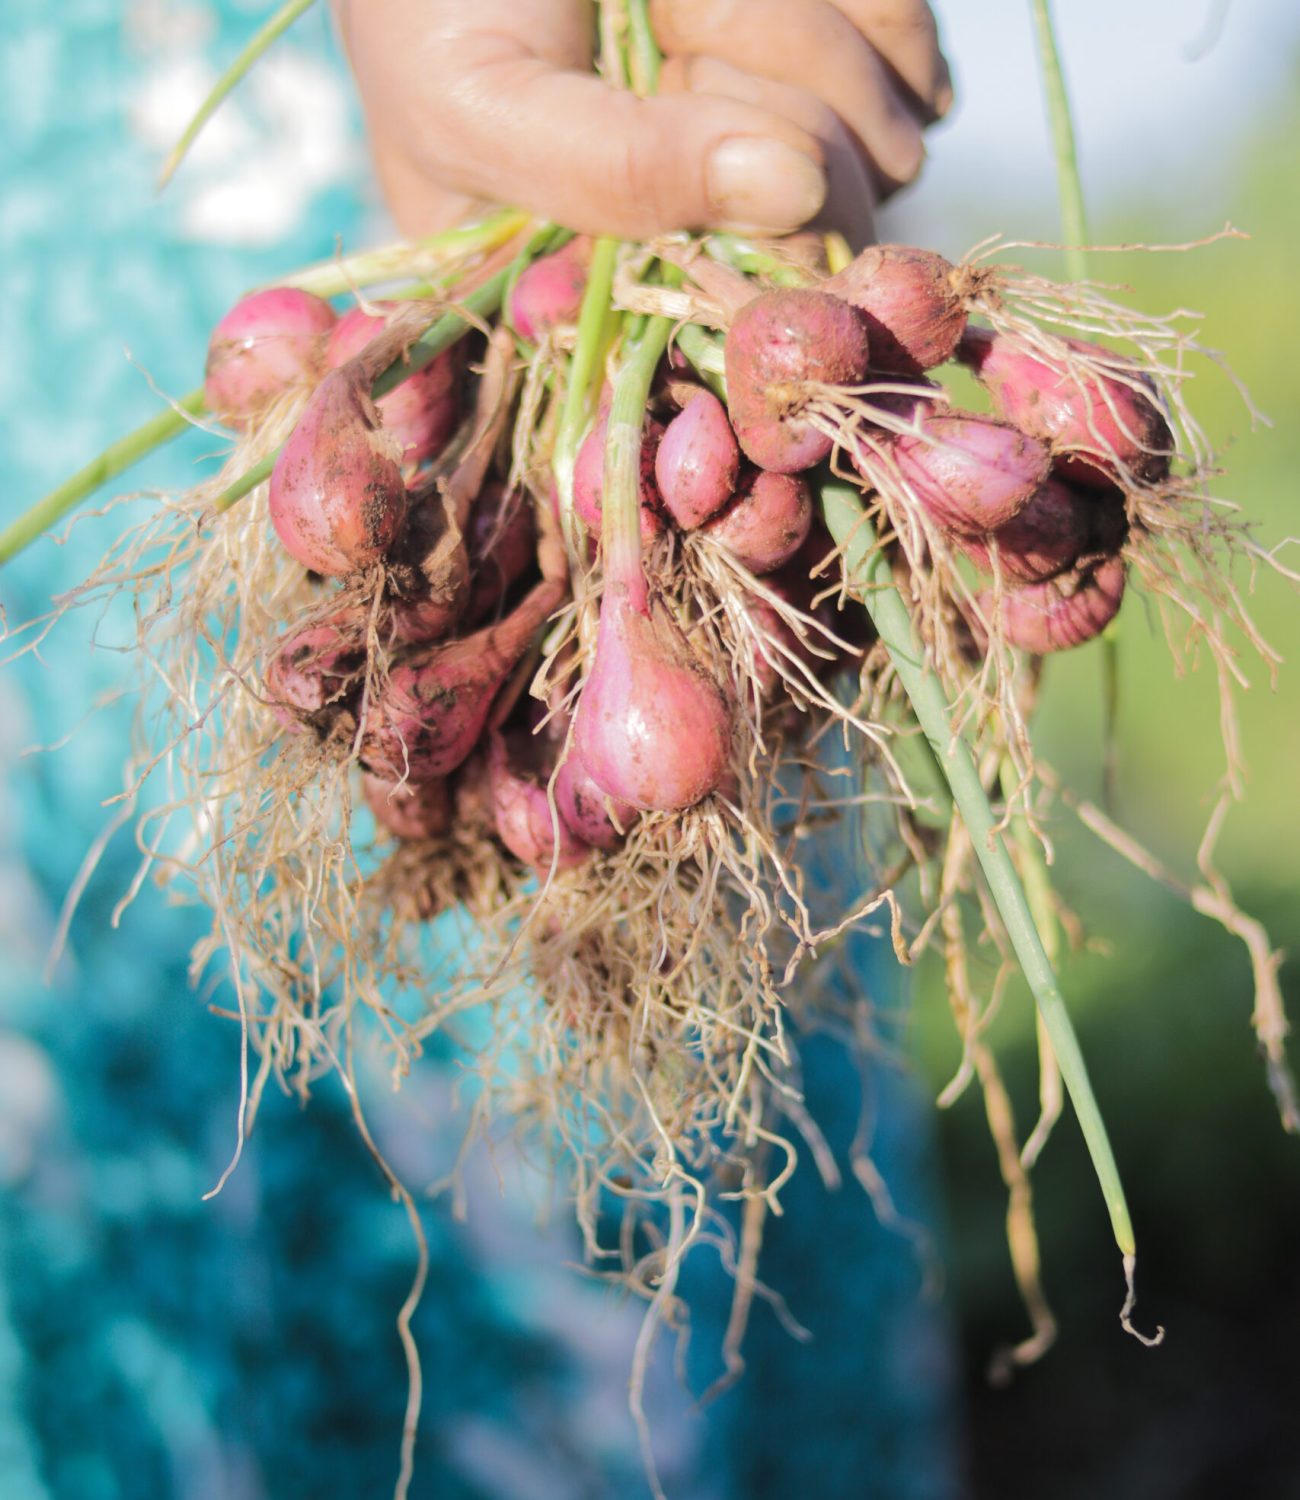 A bunch of shallots or red onions with green leaves and white roots are harvested by local Indonesian farmers. Agriculture background stock images.